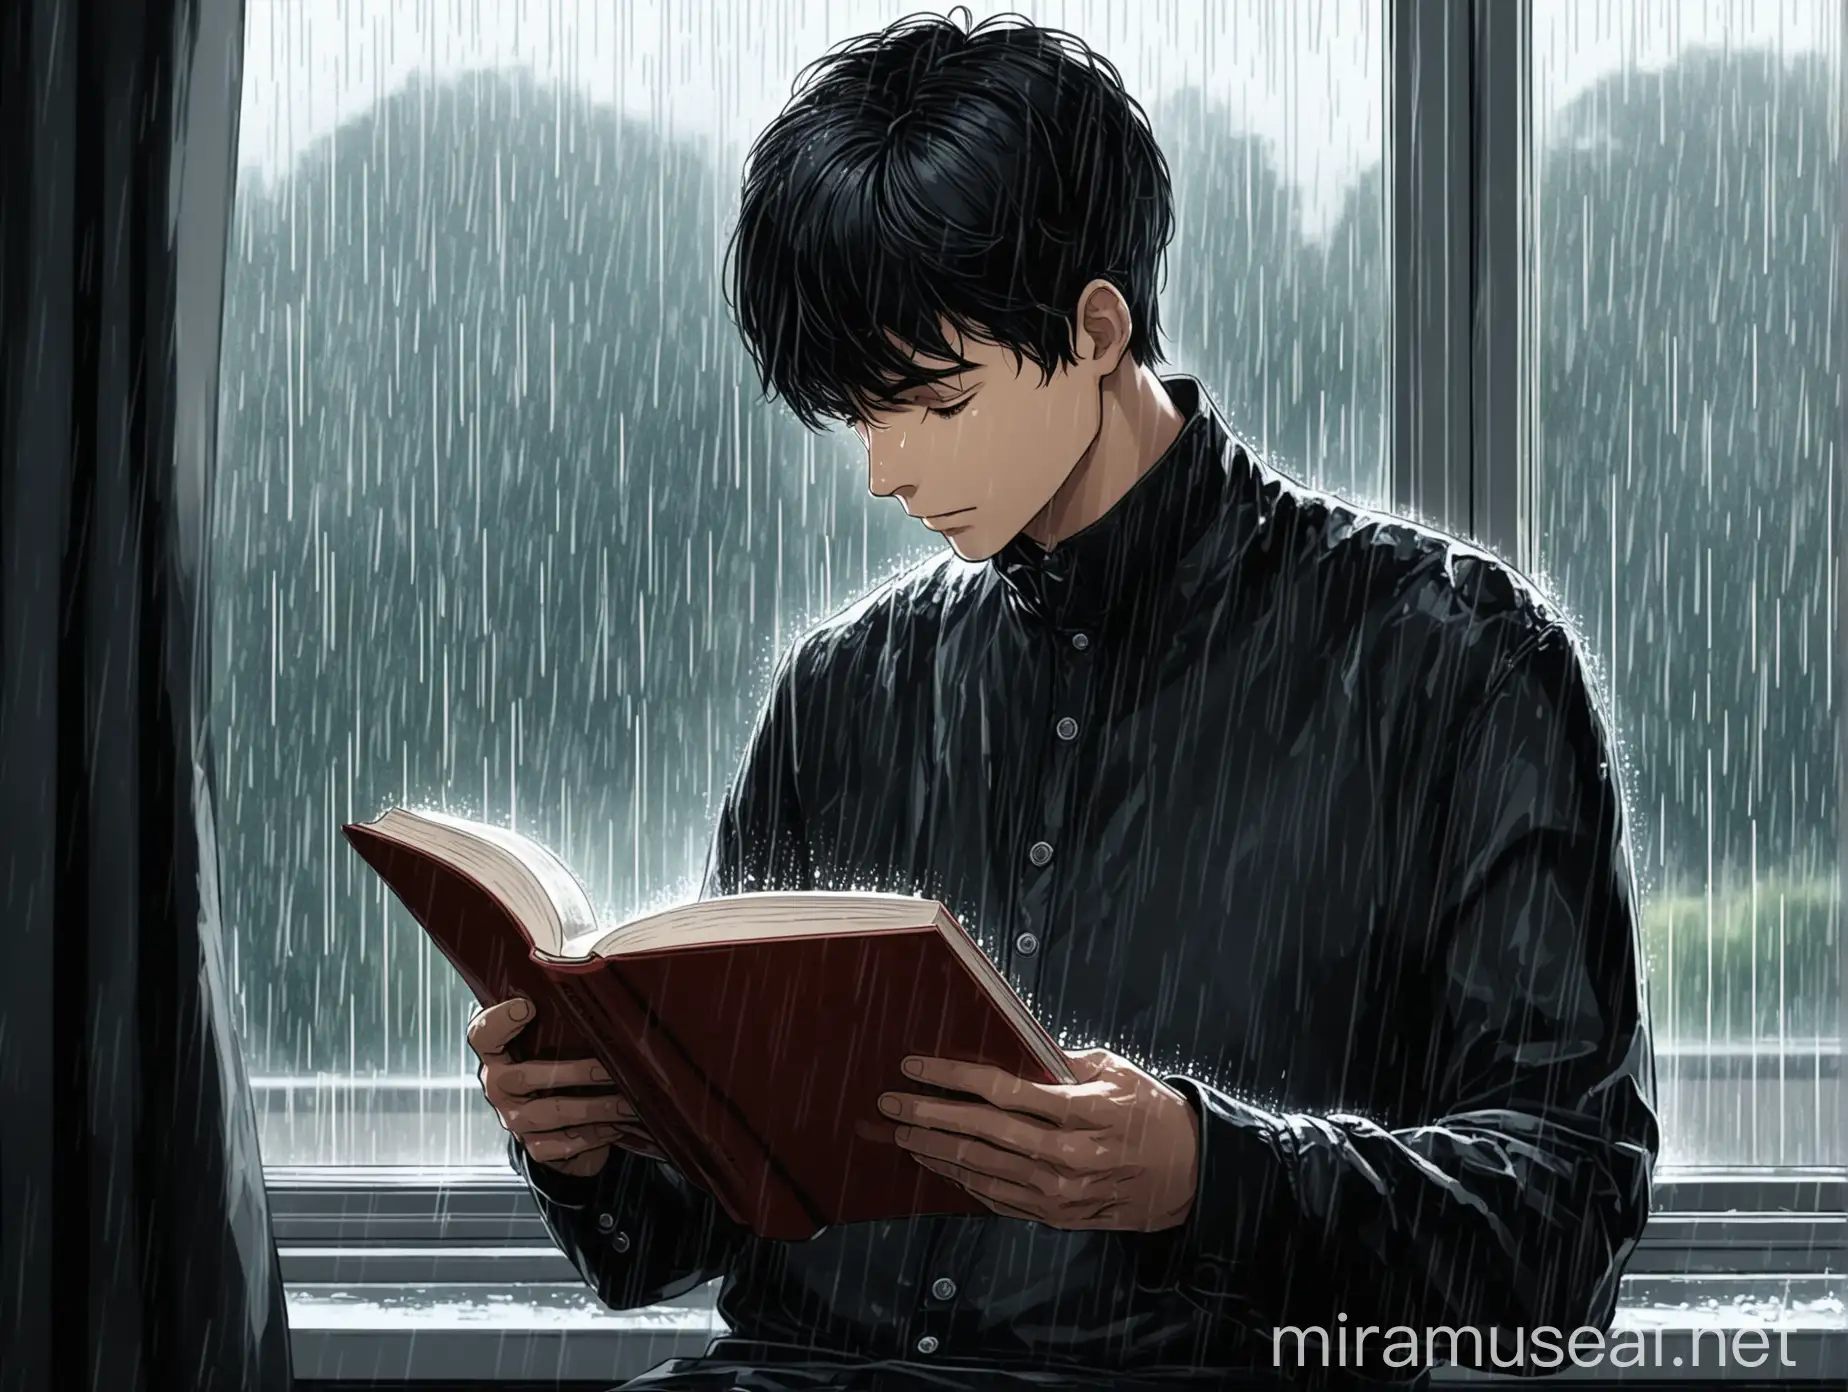 Man Reading Book by Rainy Window in Contemporary Setting